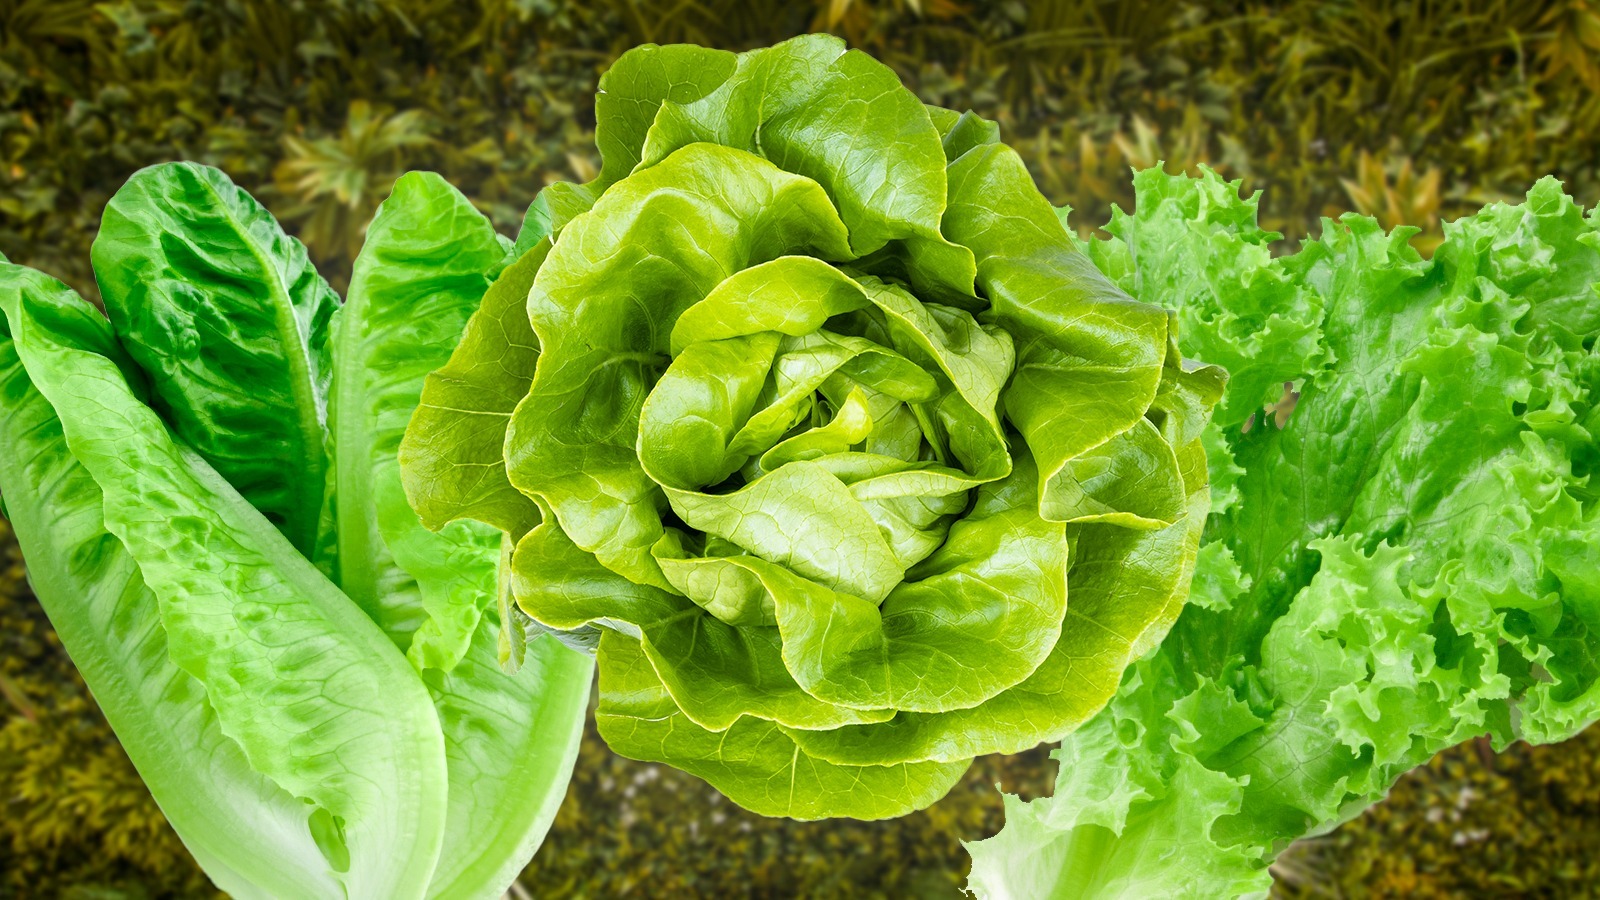 https://www.thedailymeal.com/img/gallery/stop-wasting-lettuce-tips-for-getting-the-most-out-of-the-vegetable/l-intro-1684327841.jpg